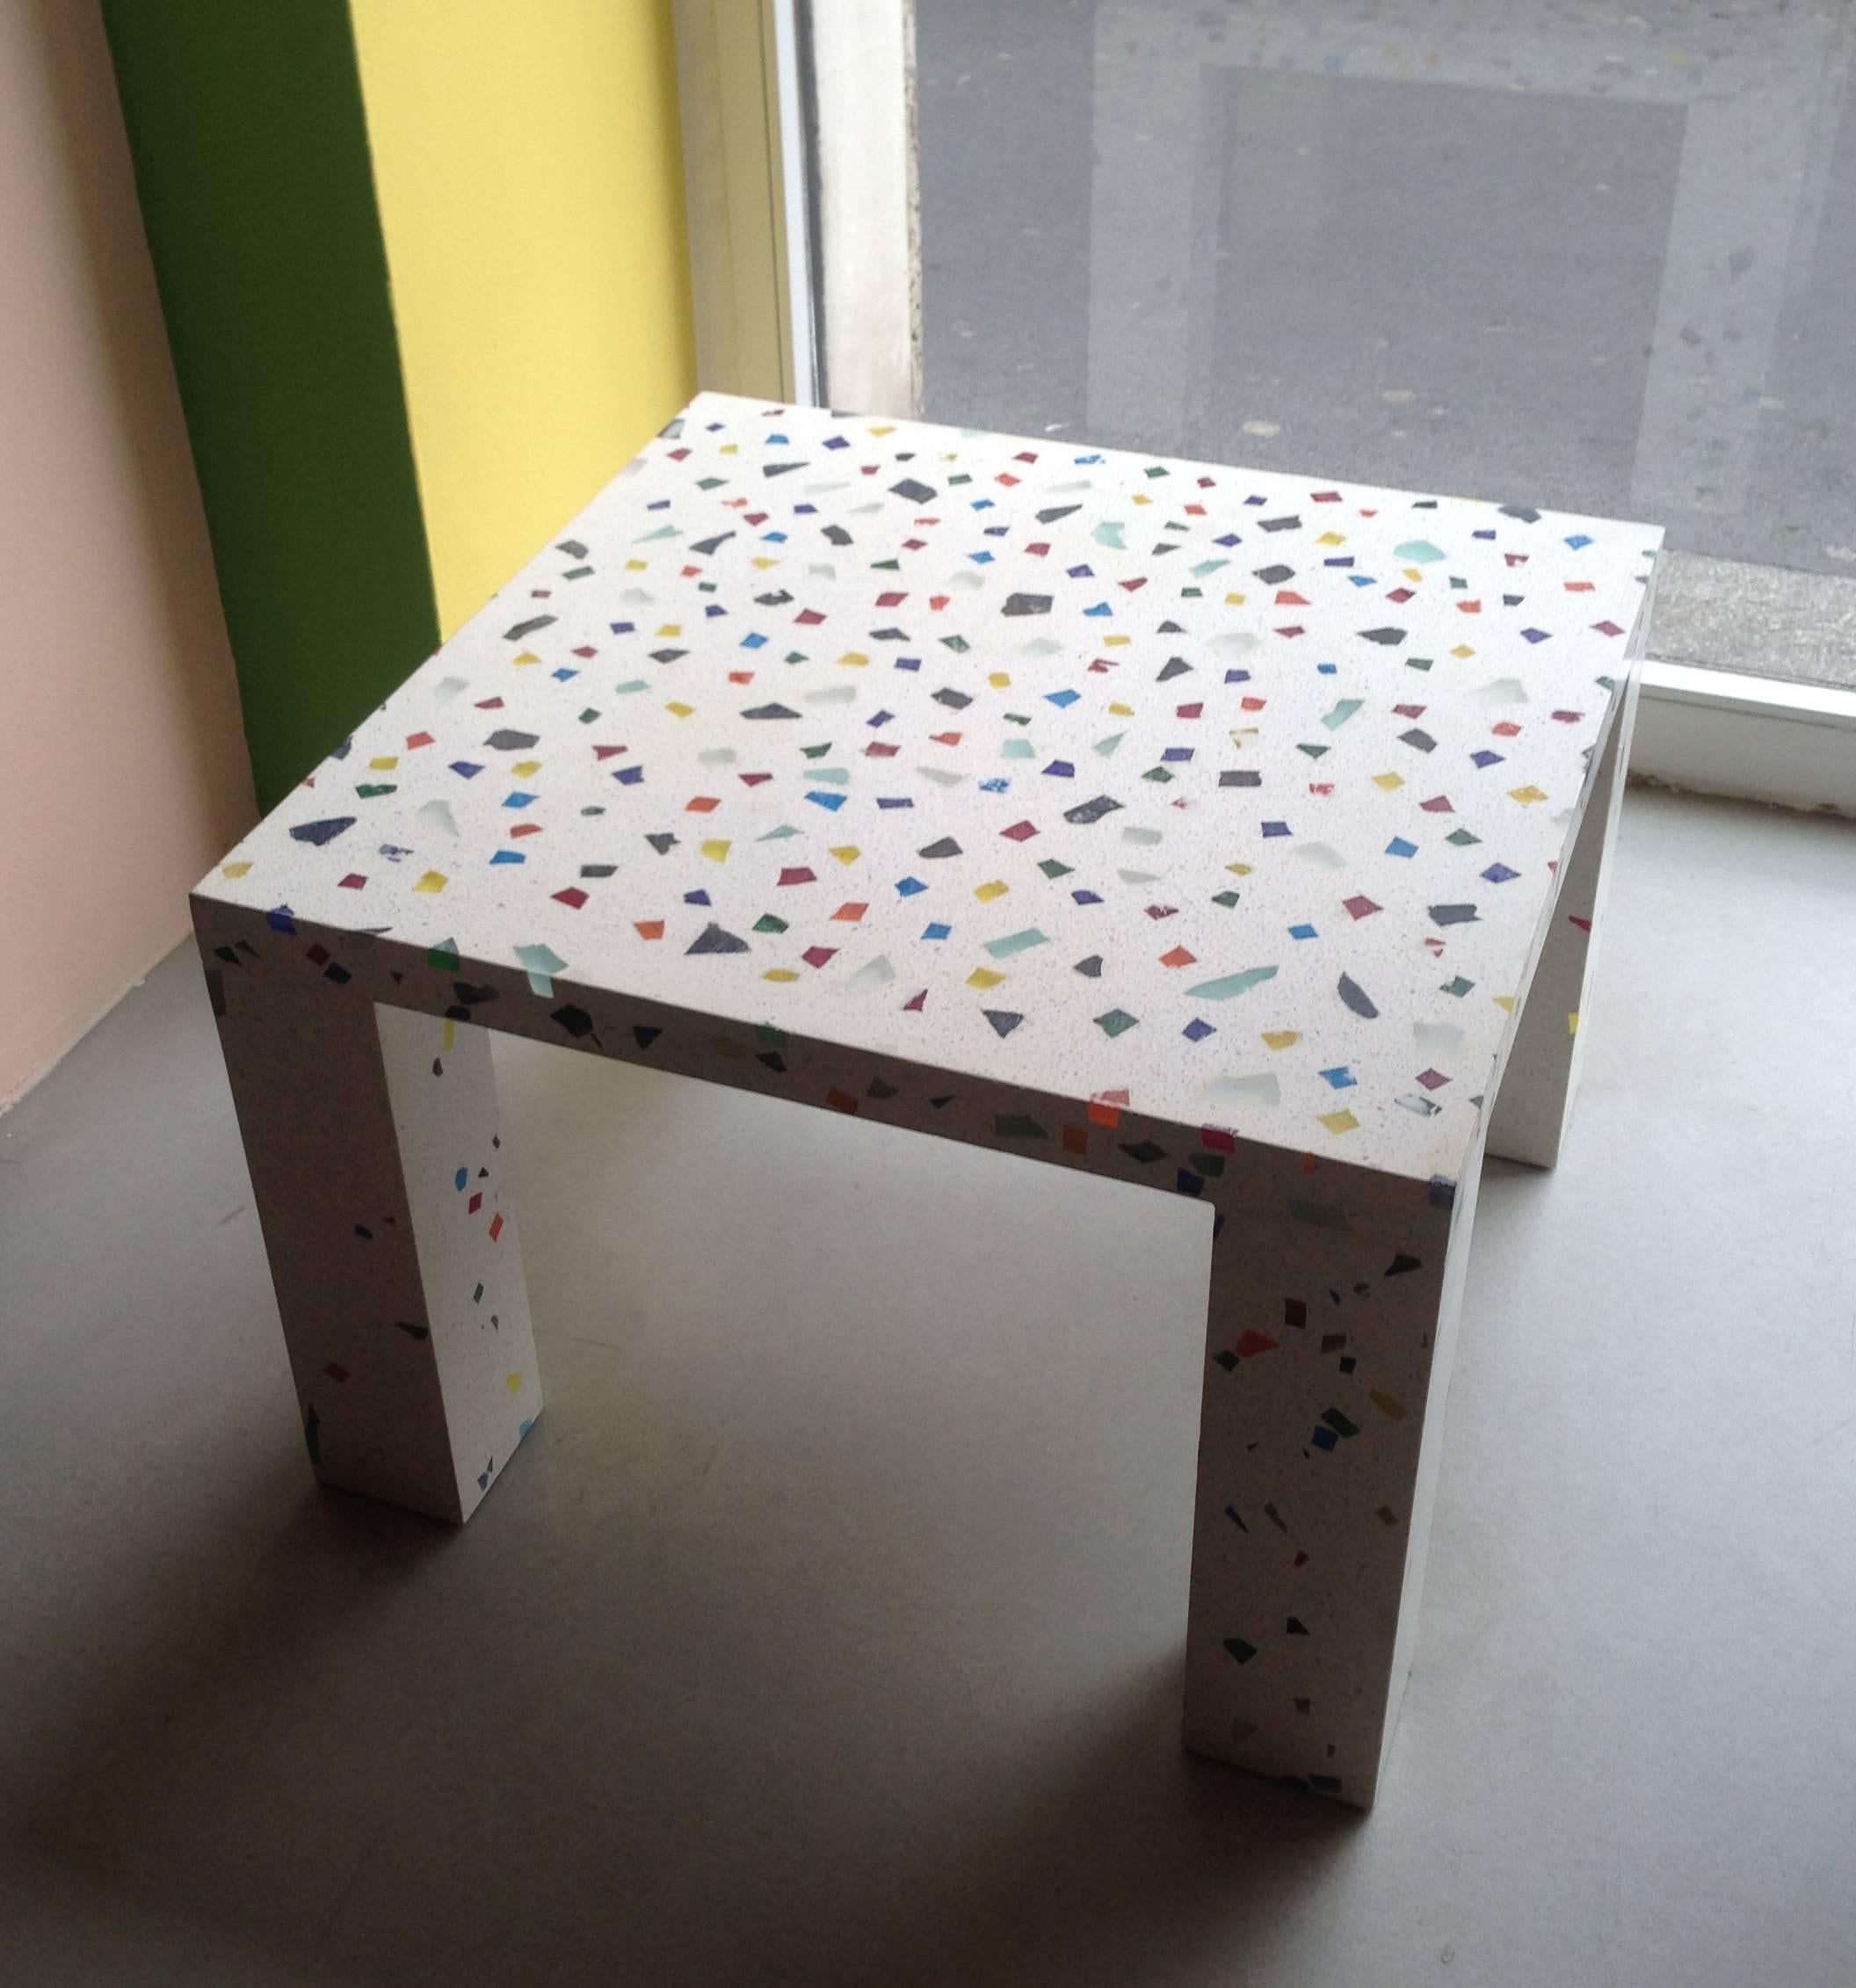 Nara aquare table (1983).
Shiro Kuramata (Japan) / Memphis Milano.
Square end or coffee table in metal and colored-glass-infused "Star Piece" terrazzo. 
Dimensions: W 23.75" x D 23.75" x H 16".

An important table design